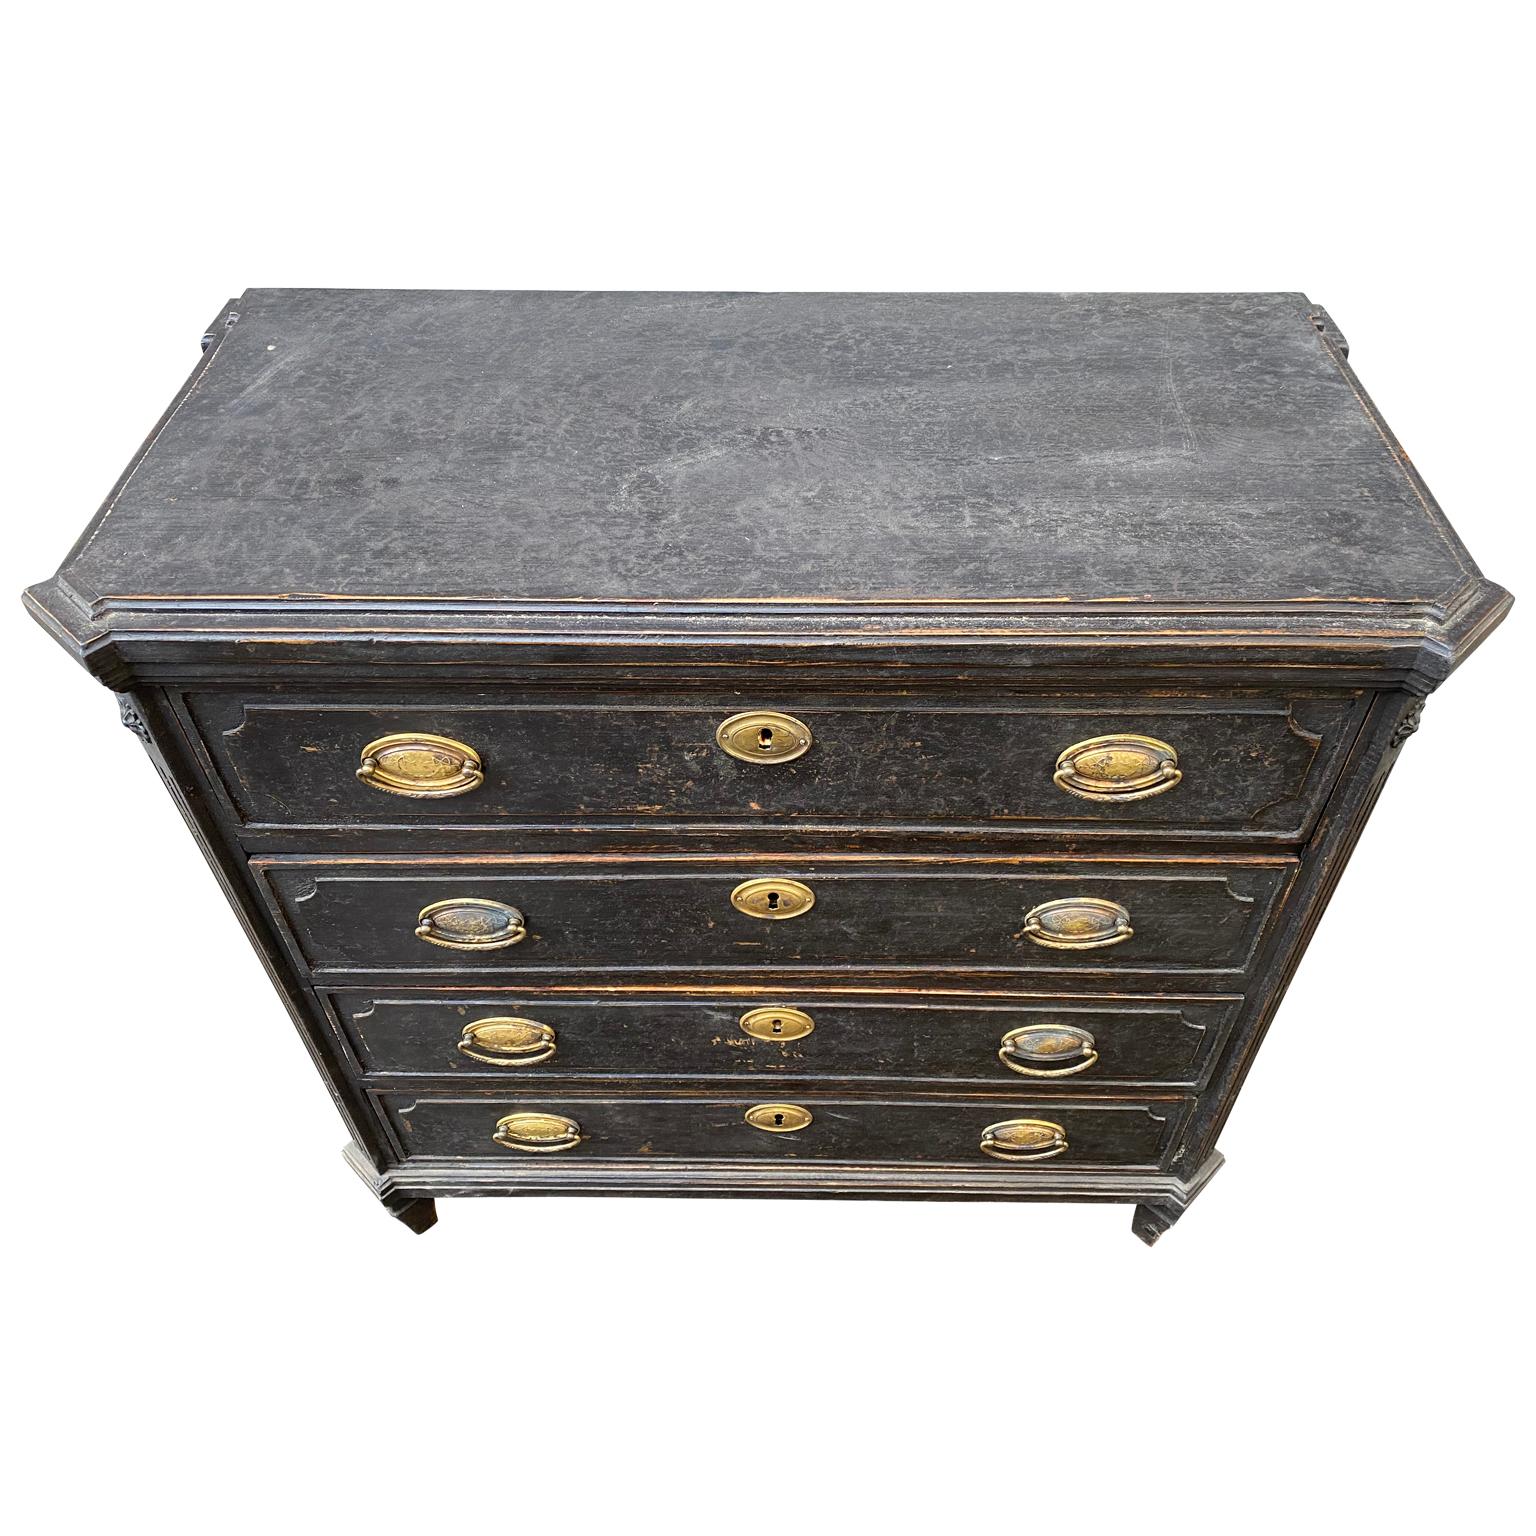 Gustavian black painted 4 drawer chest of drawers with brass hardware.